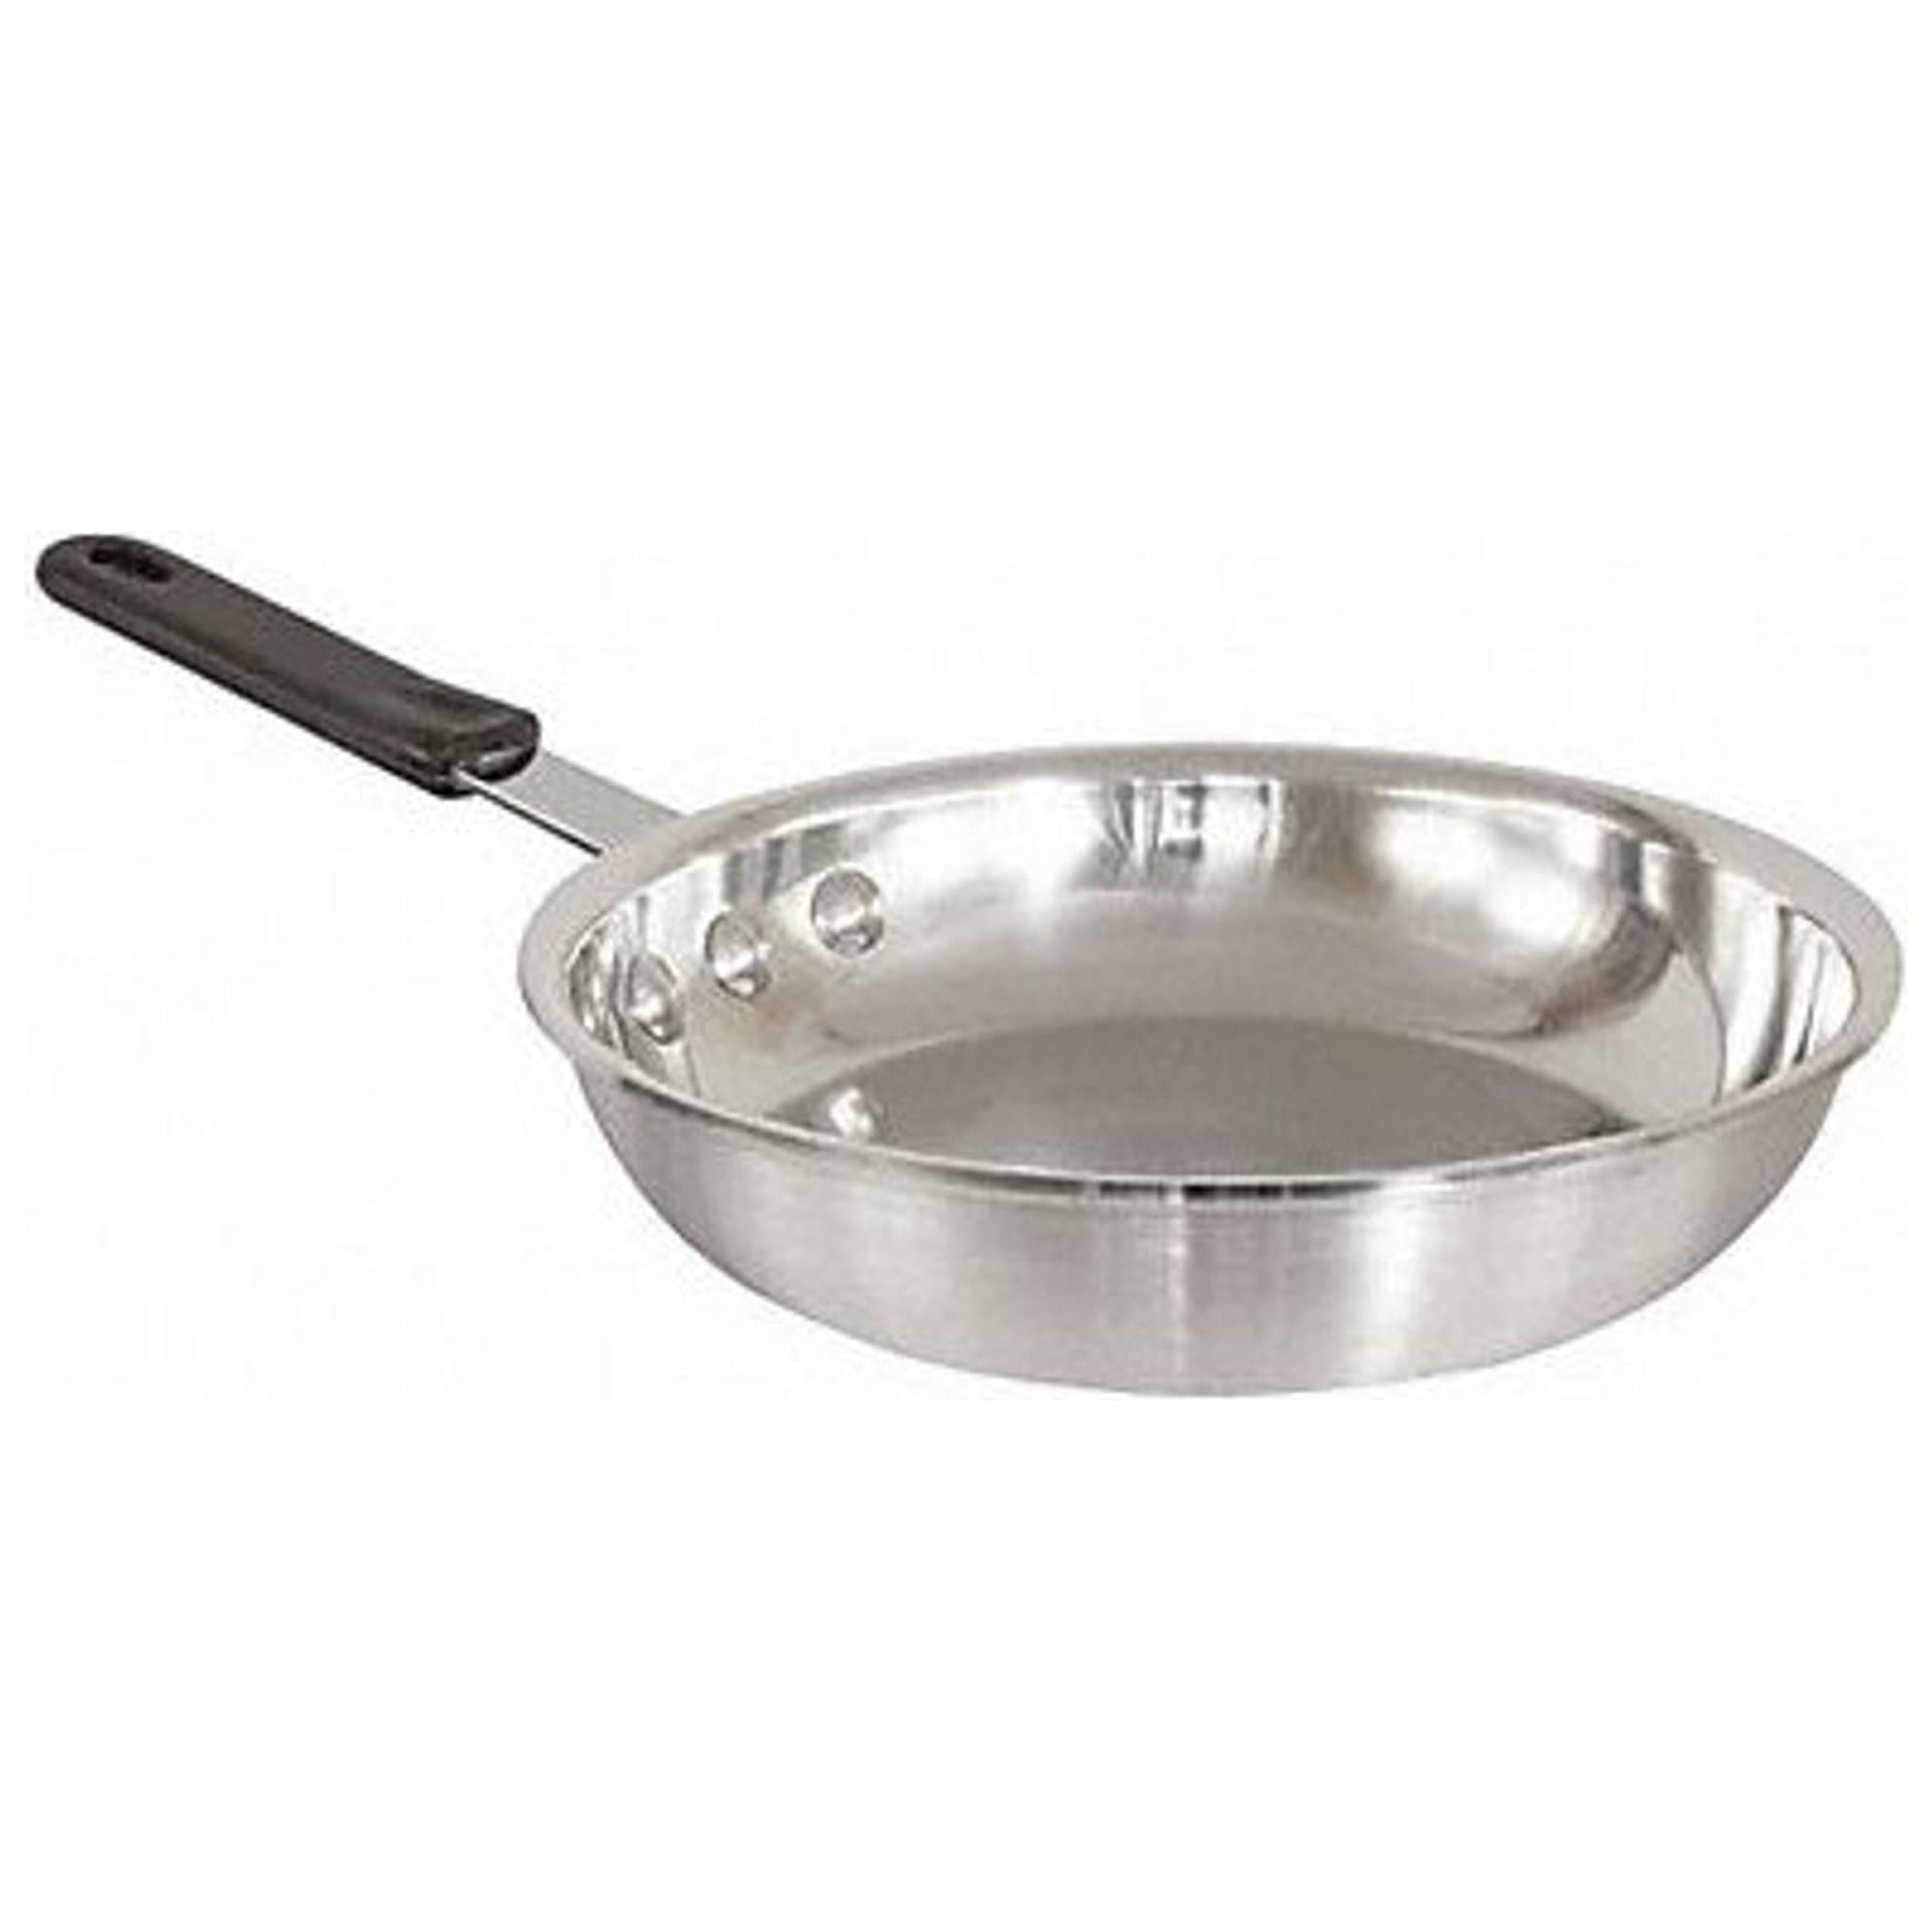 CRESTWARE 12-Inch Coated Induction Efficient Fry Pan